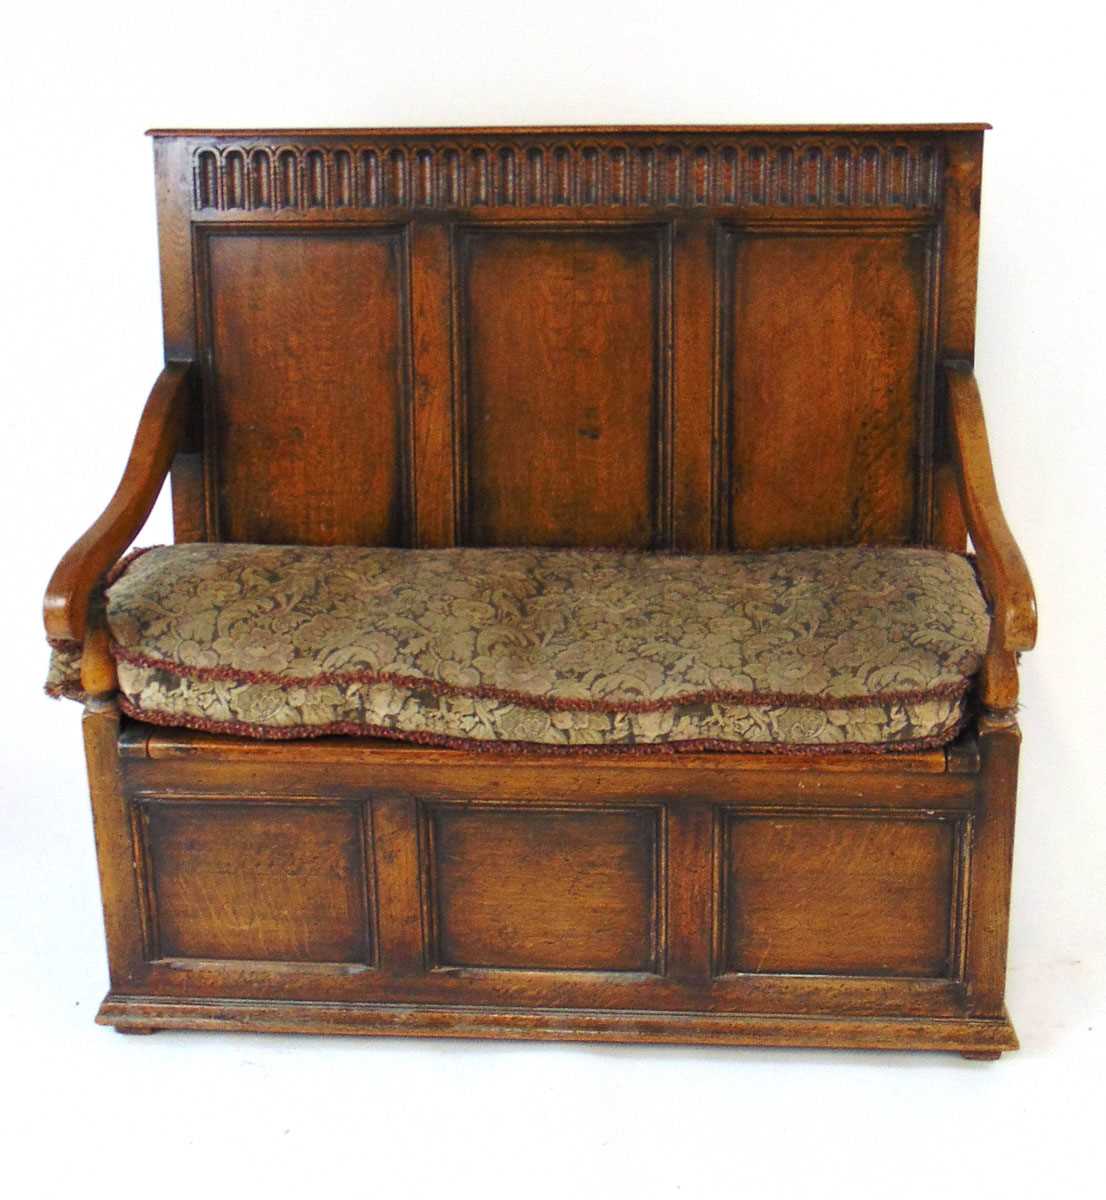 An early 20th century reproduction oak box settle, with a narrow arcaded frieze above three